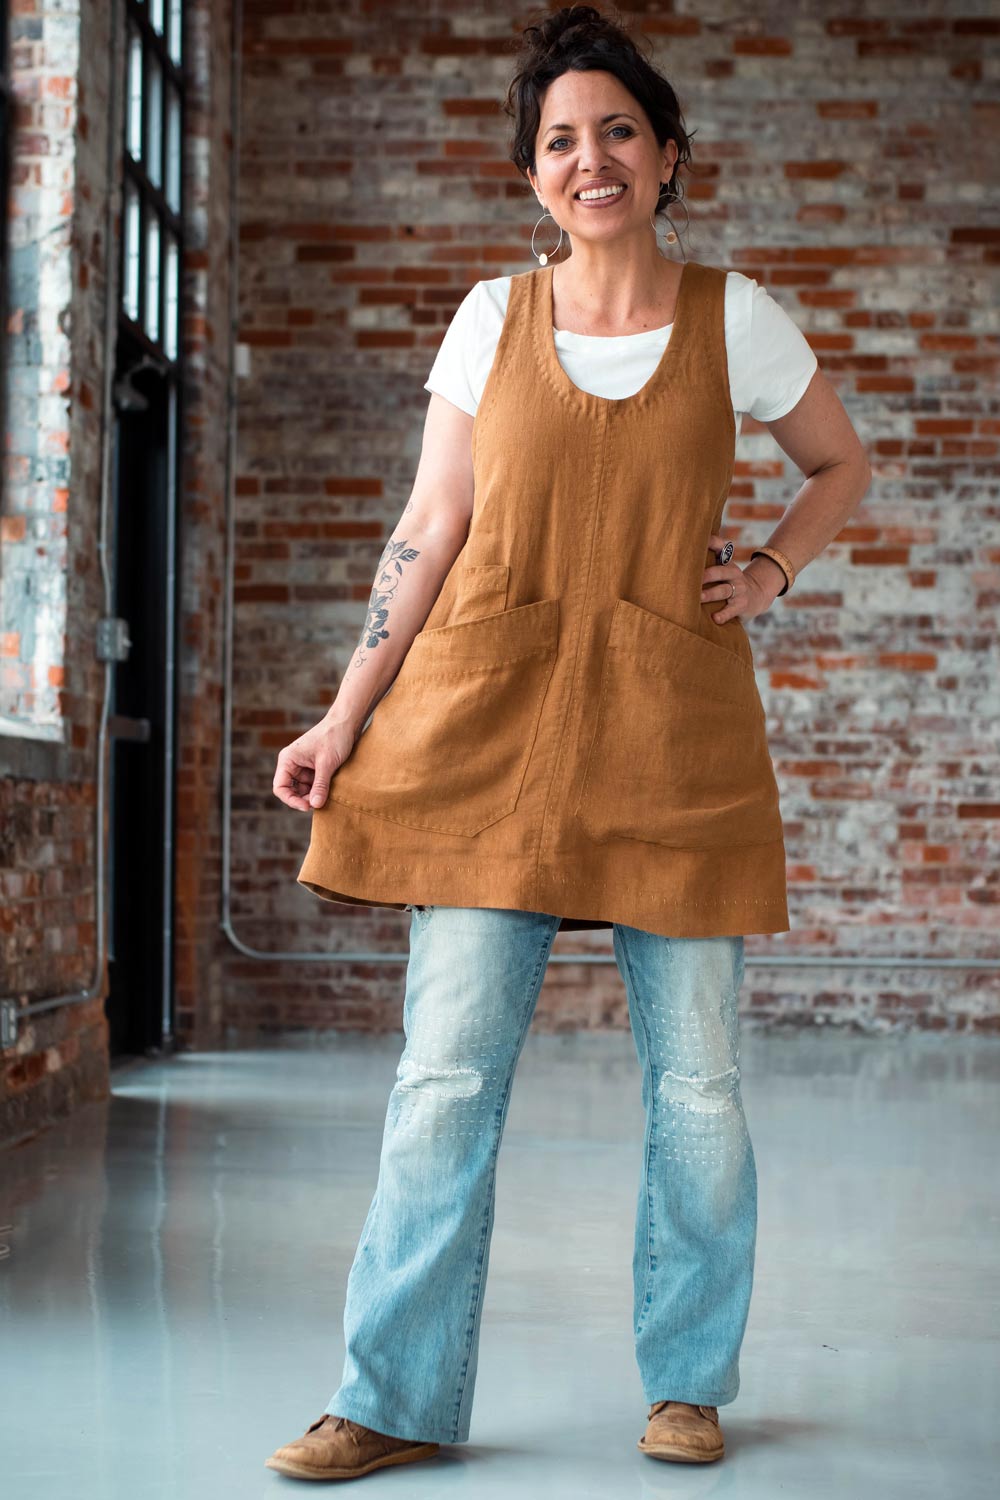 Woman wearing the Studio Tunic sewing pattern from Sew Liberated on The Fold Line. A pinafore tunic pattern made in mid-weight linen, chambray, cotton twill or light canvas fabrics, featuring roomy pockets, deep scoop neck, low armholes, A-line silhouette and mid-thigh hem.